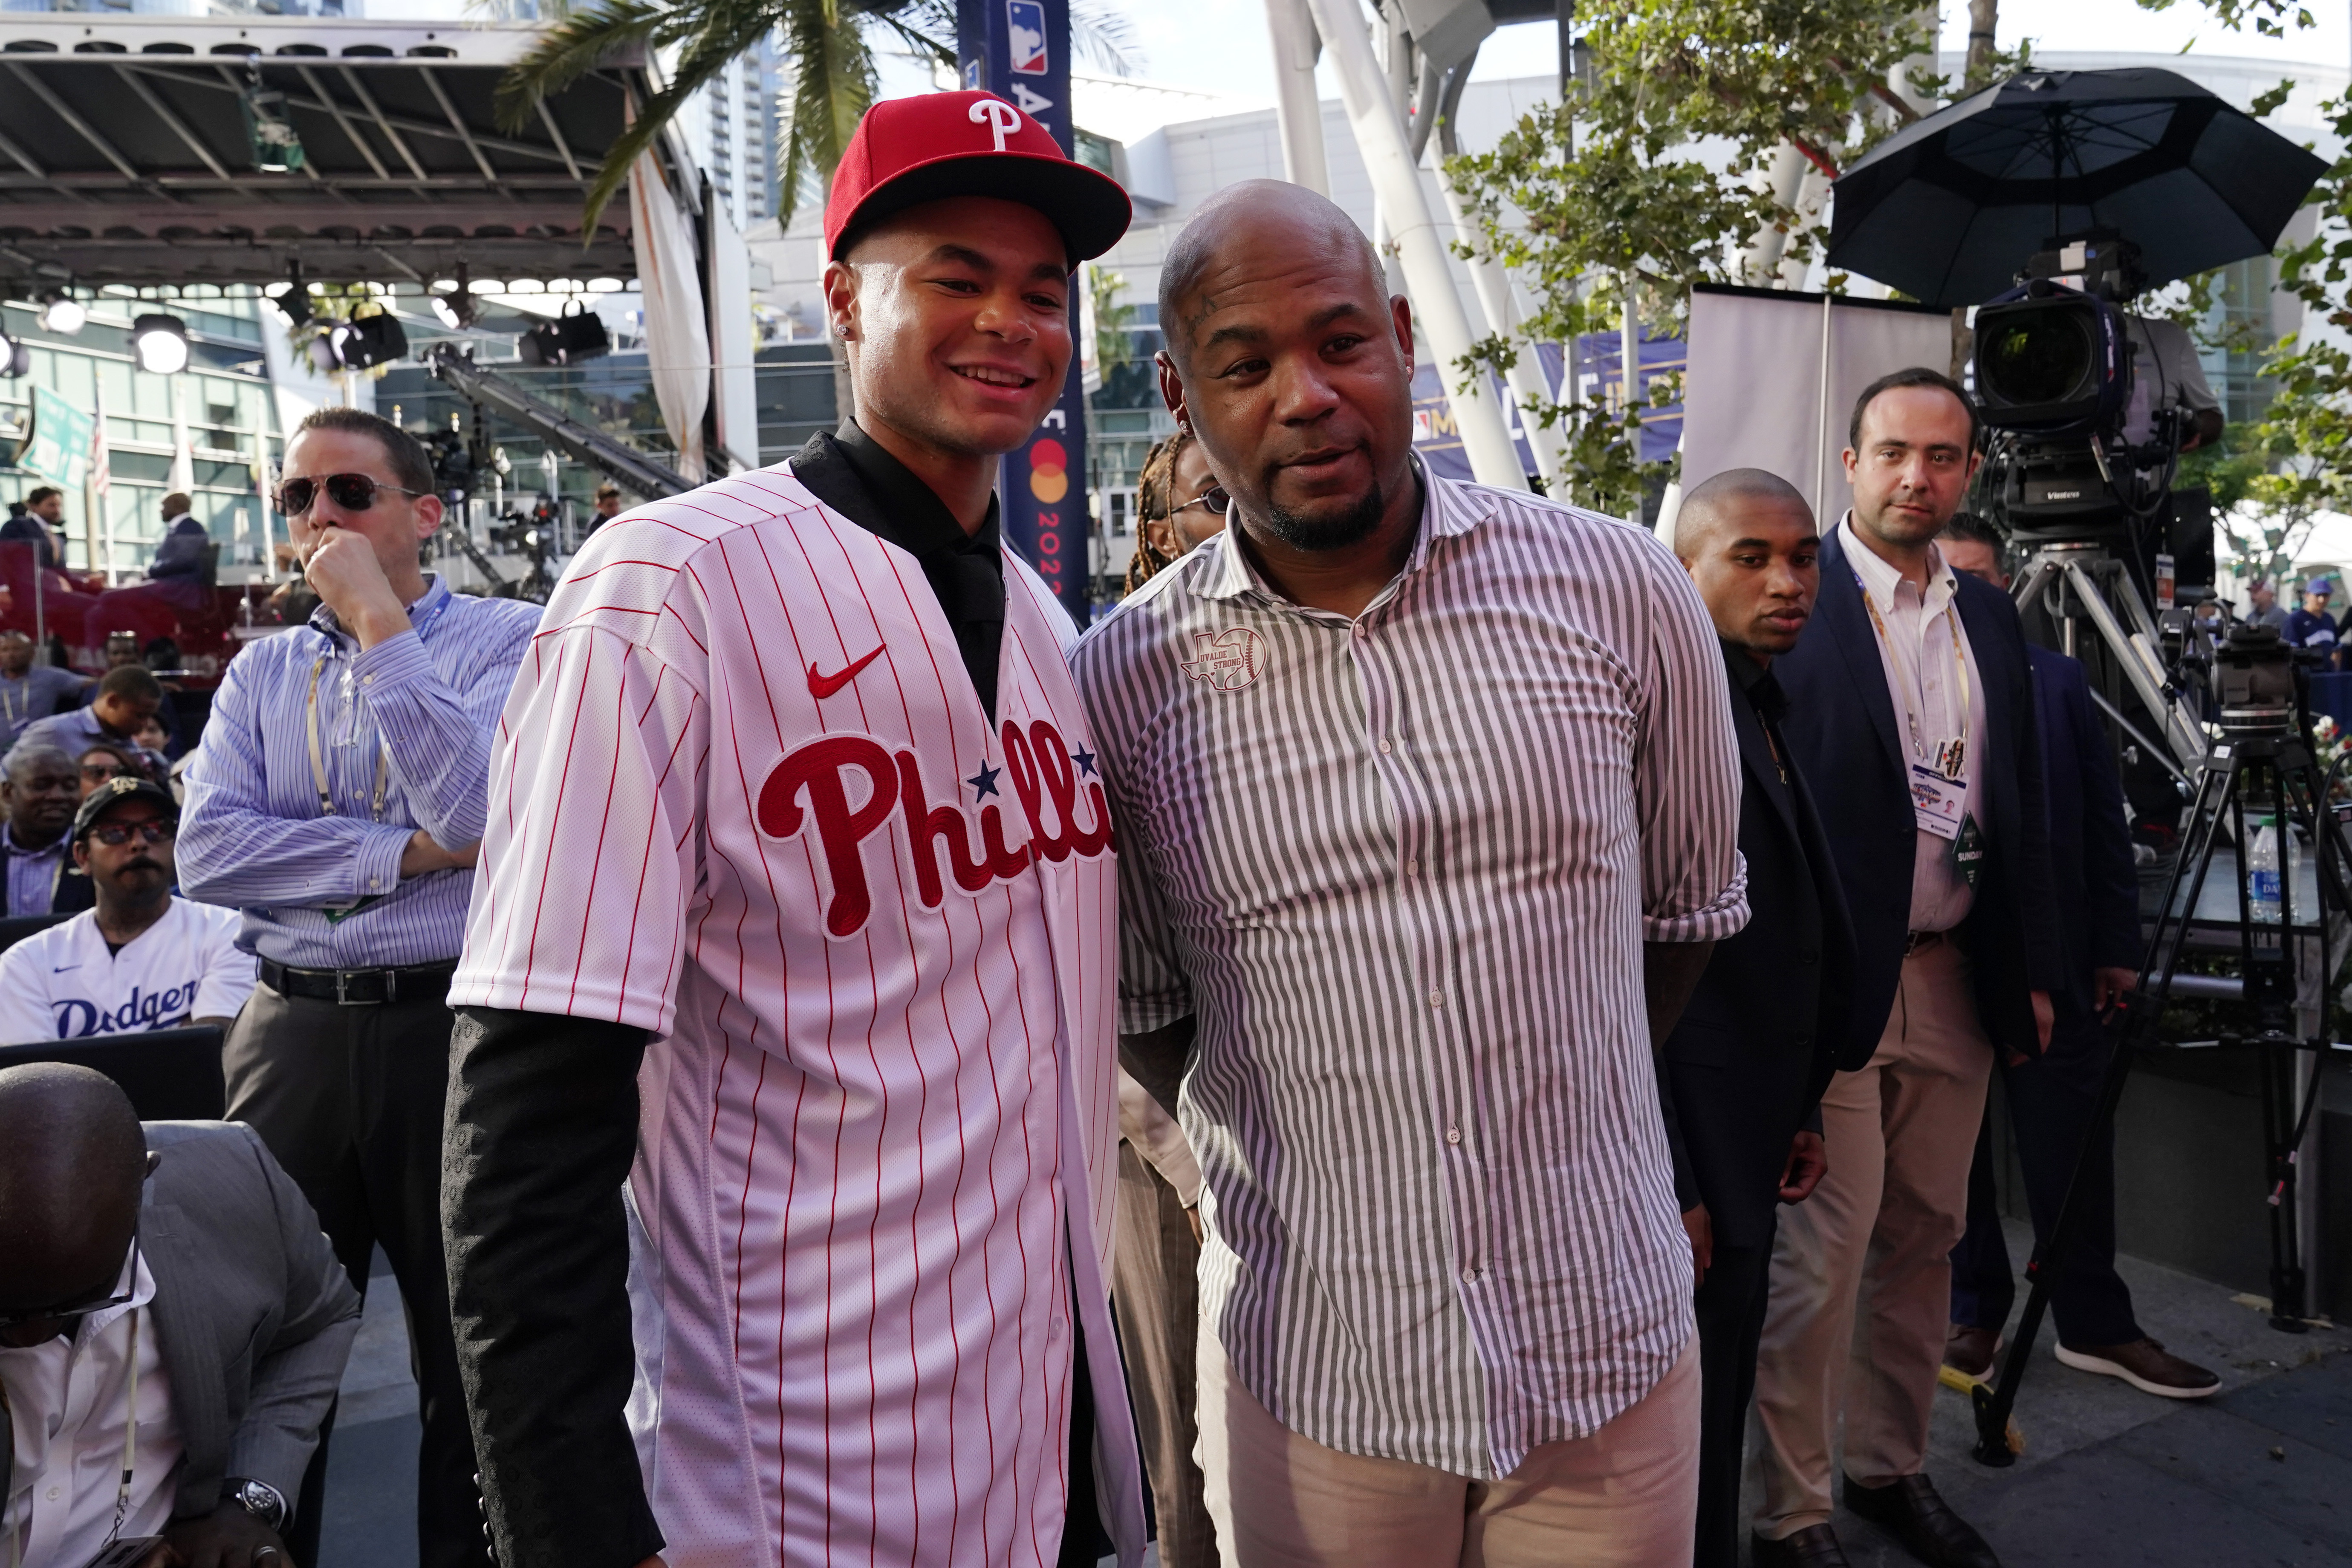 Son of former Ray Carl Crawford to play in All-Star Futures Game